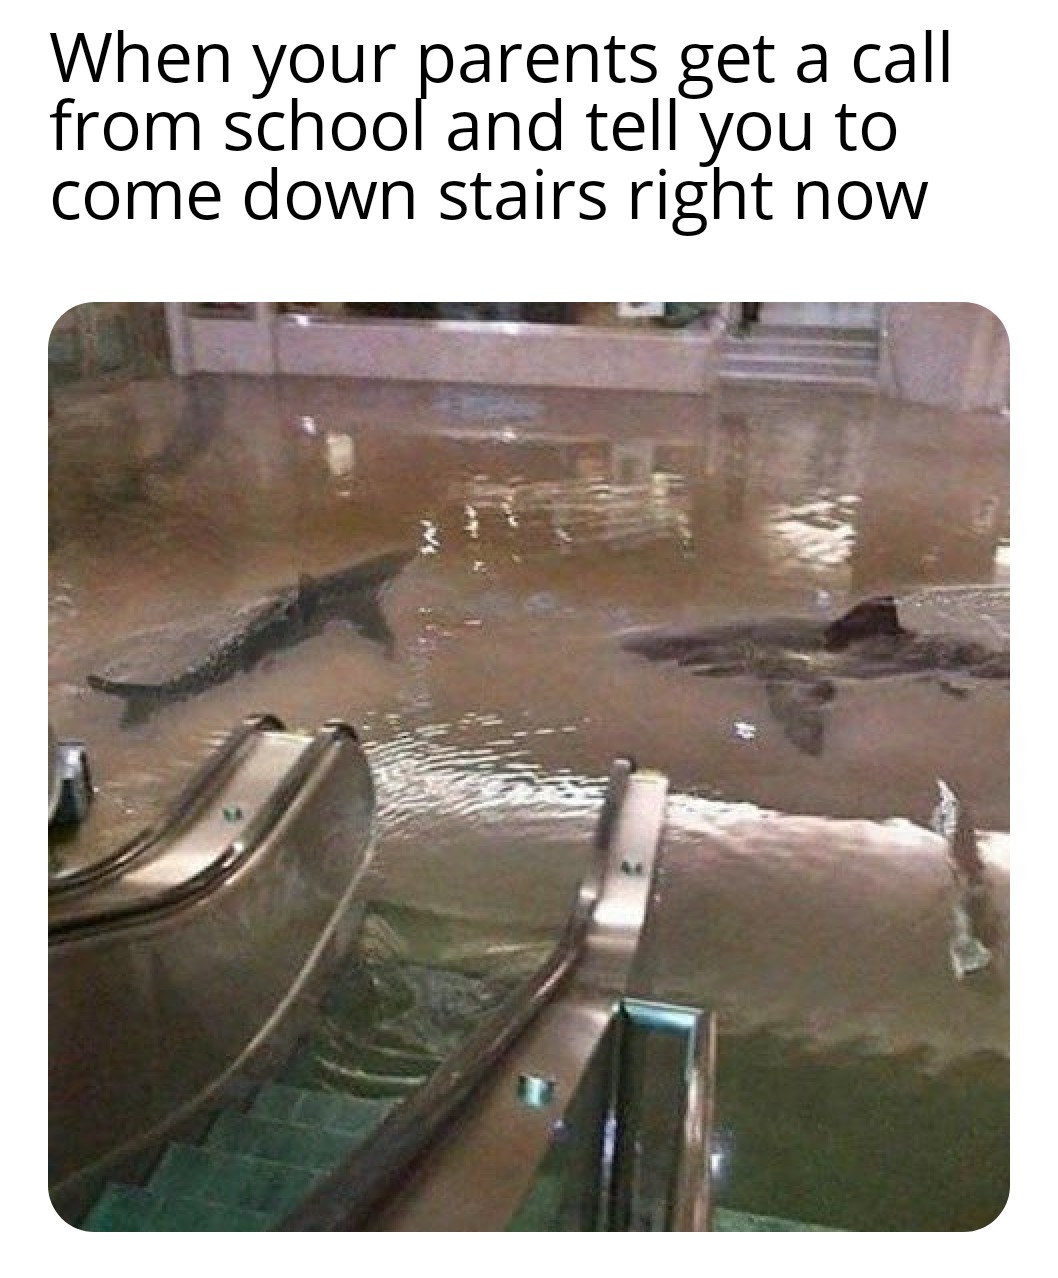 daily dose of memes - sharks on highway florida - When your parents get a call from school and tell you to come down stairs right now 2